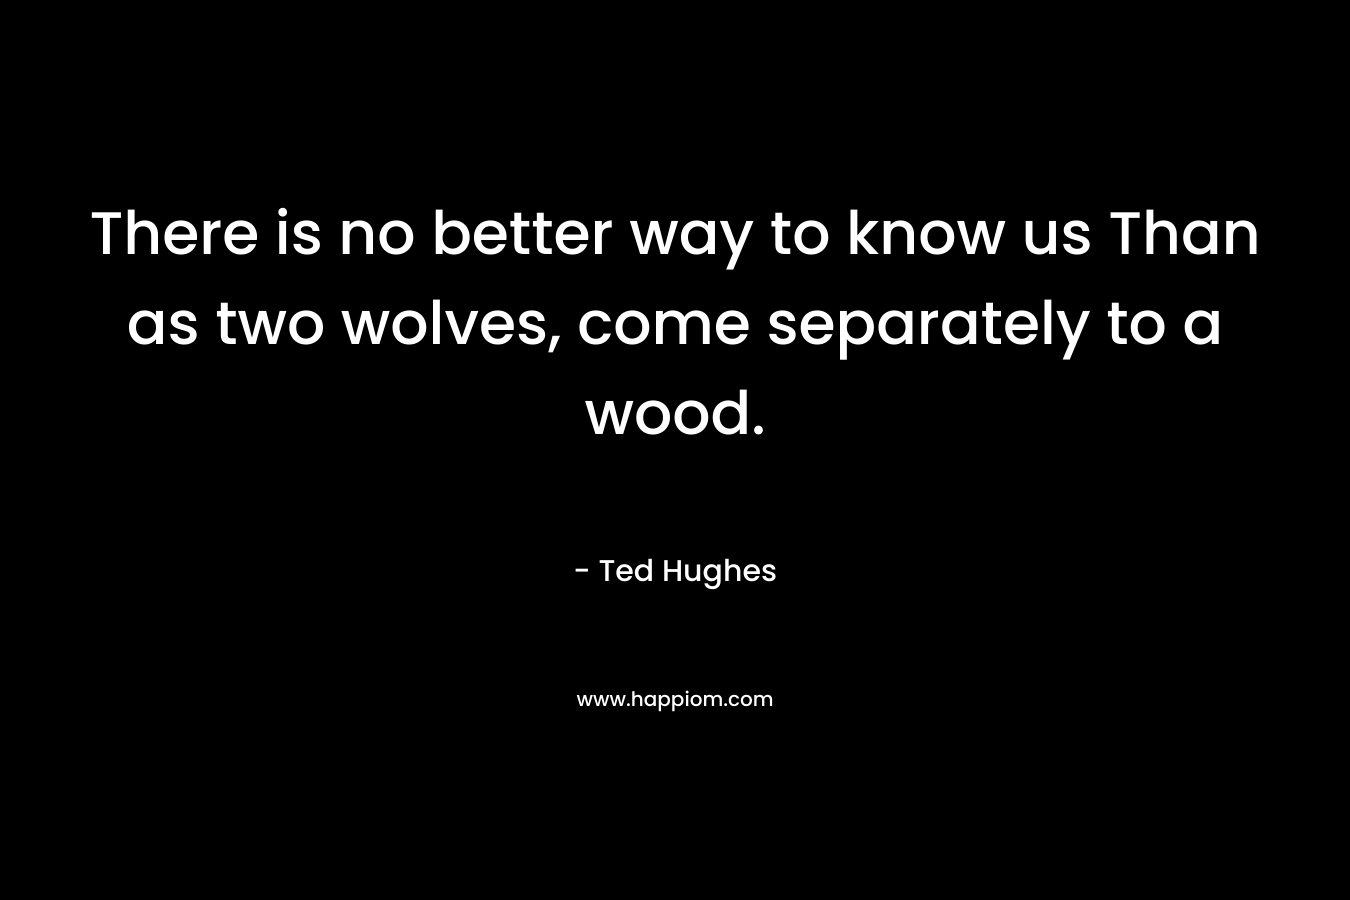 There is no better way to know us Than as two wolves, come separately to a wood.